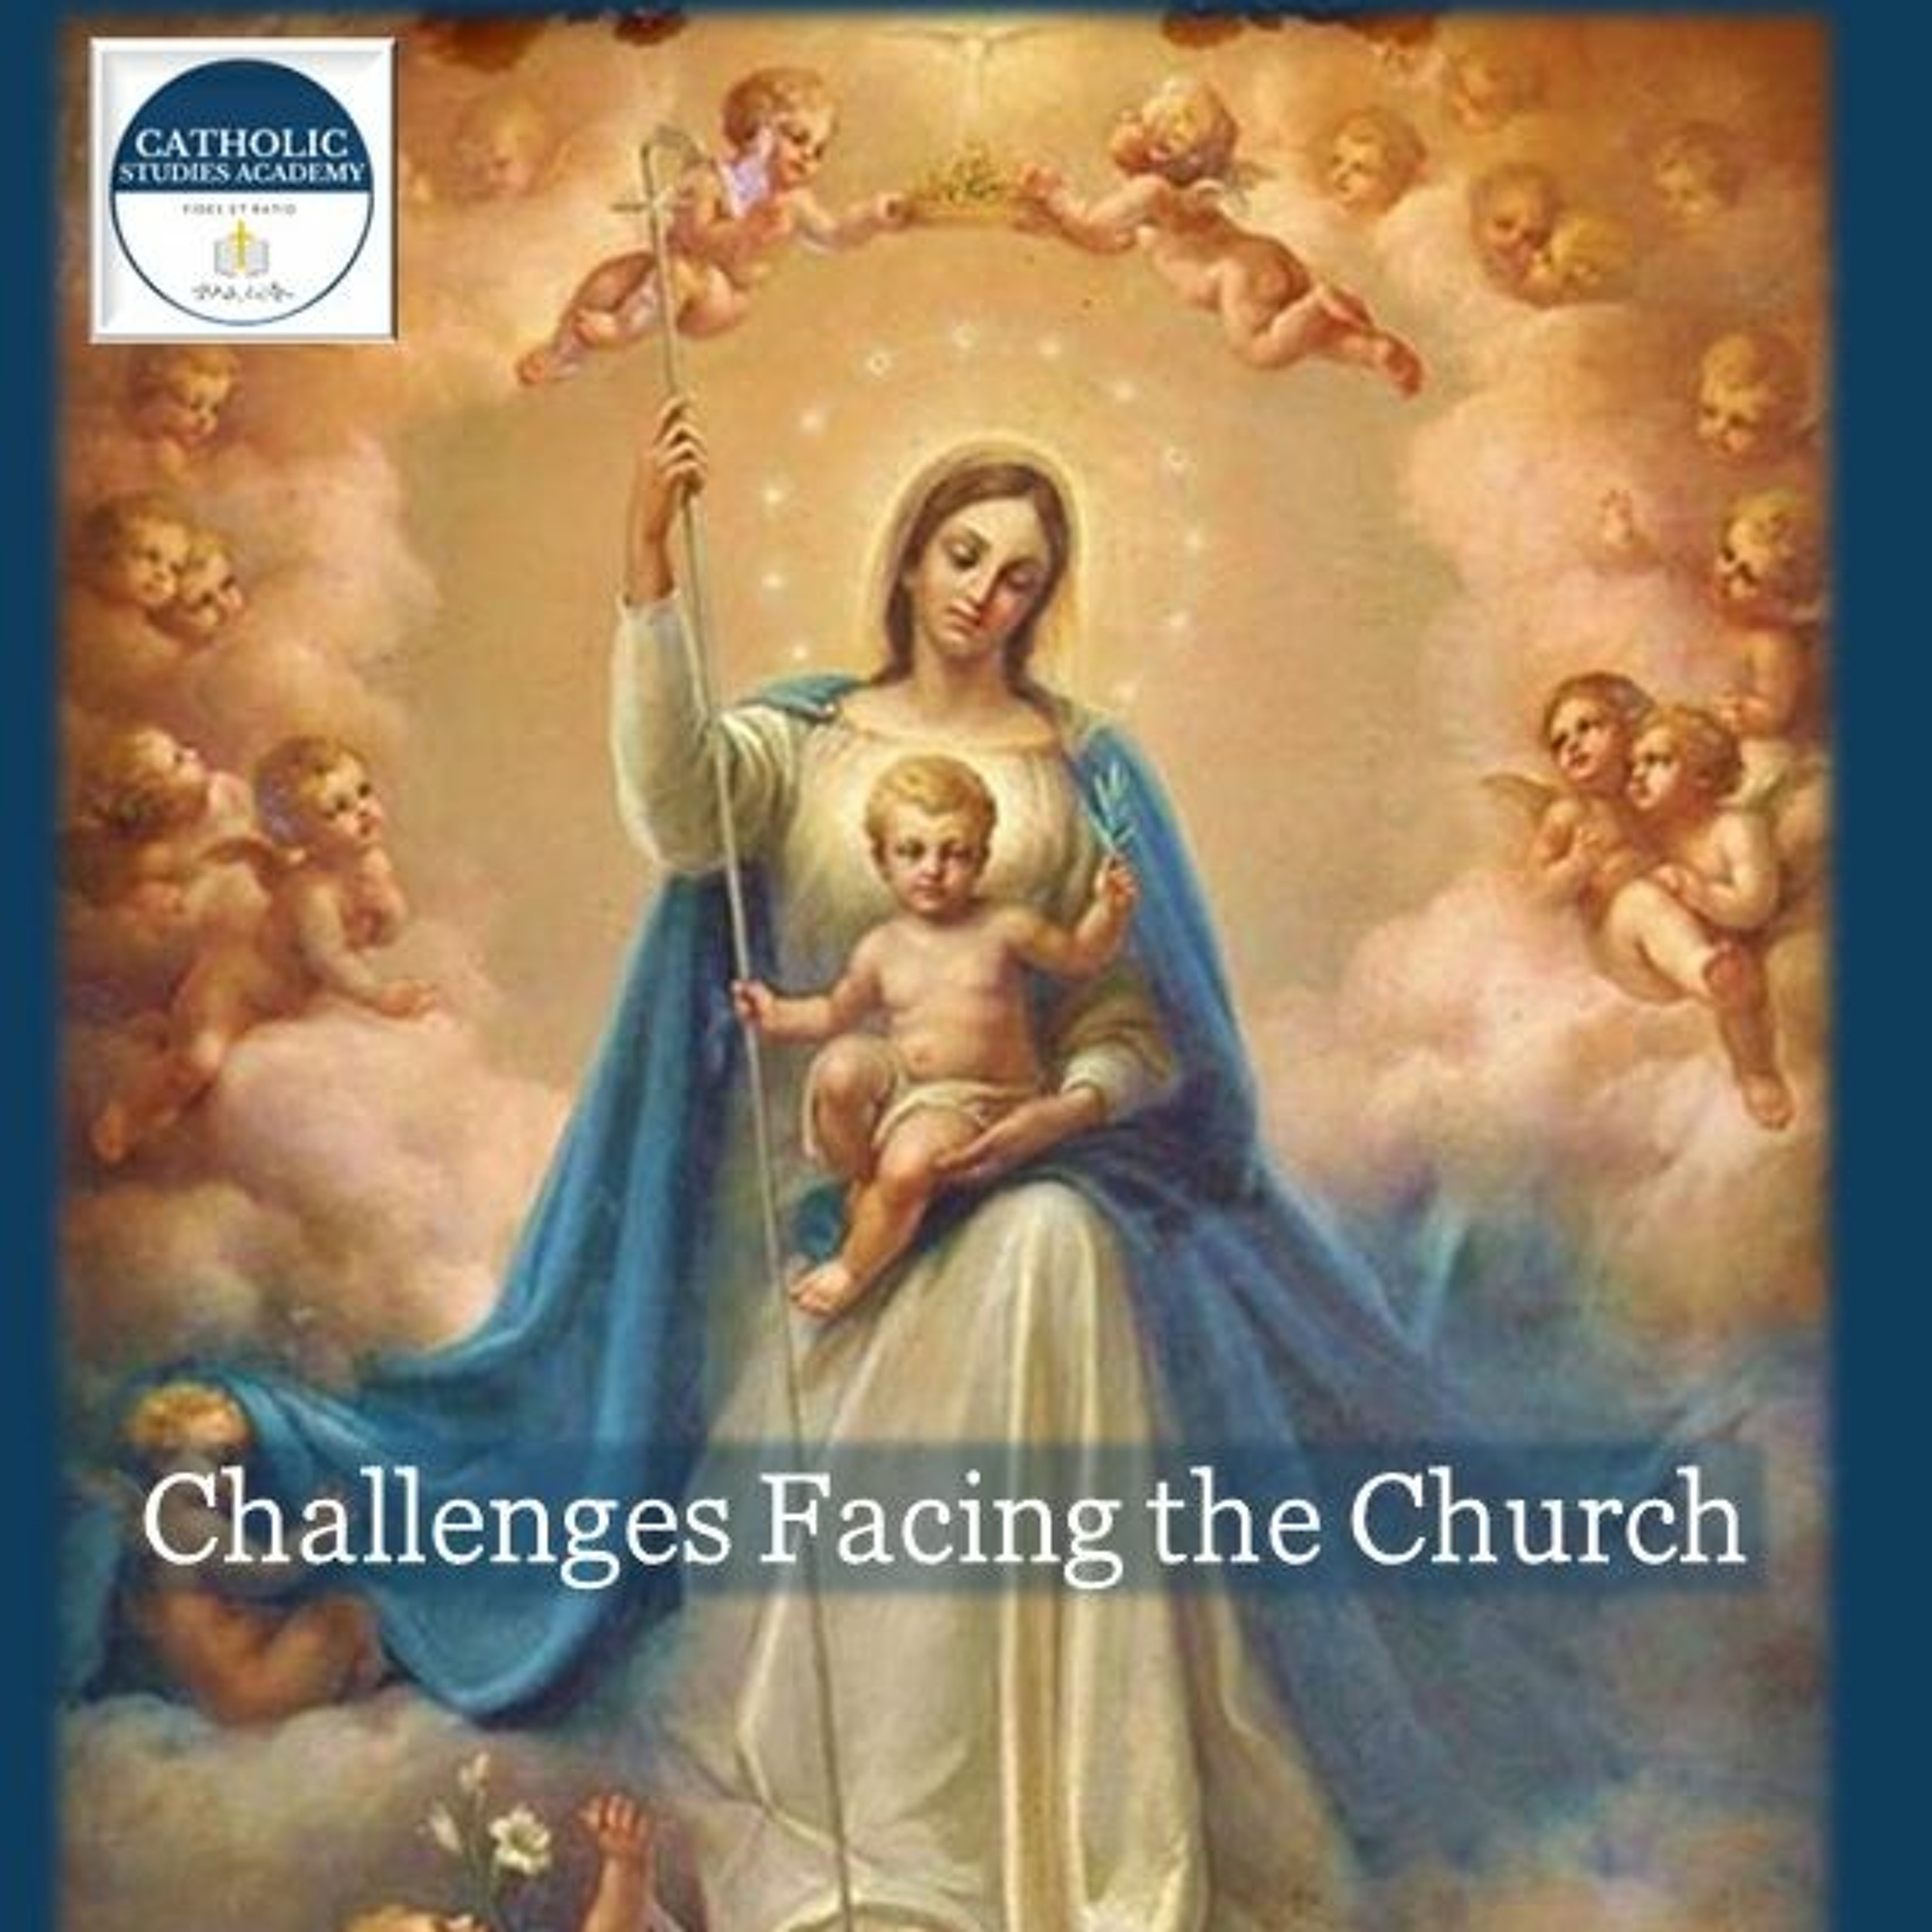 The Church in the Age of Dionysius: Challenges Facing the Church